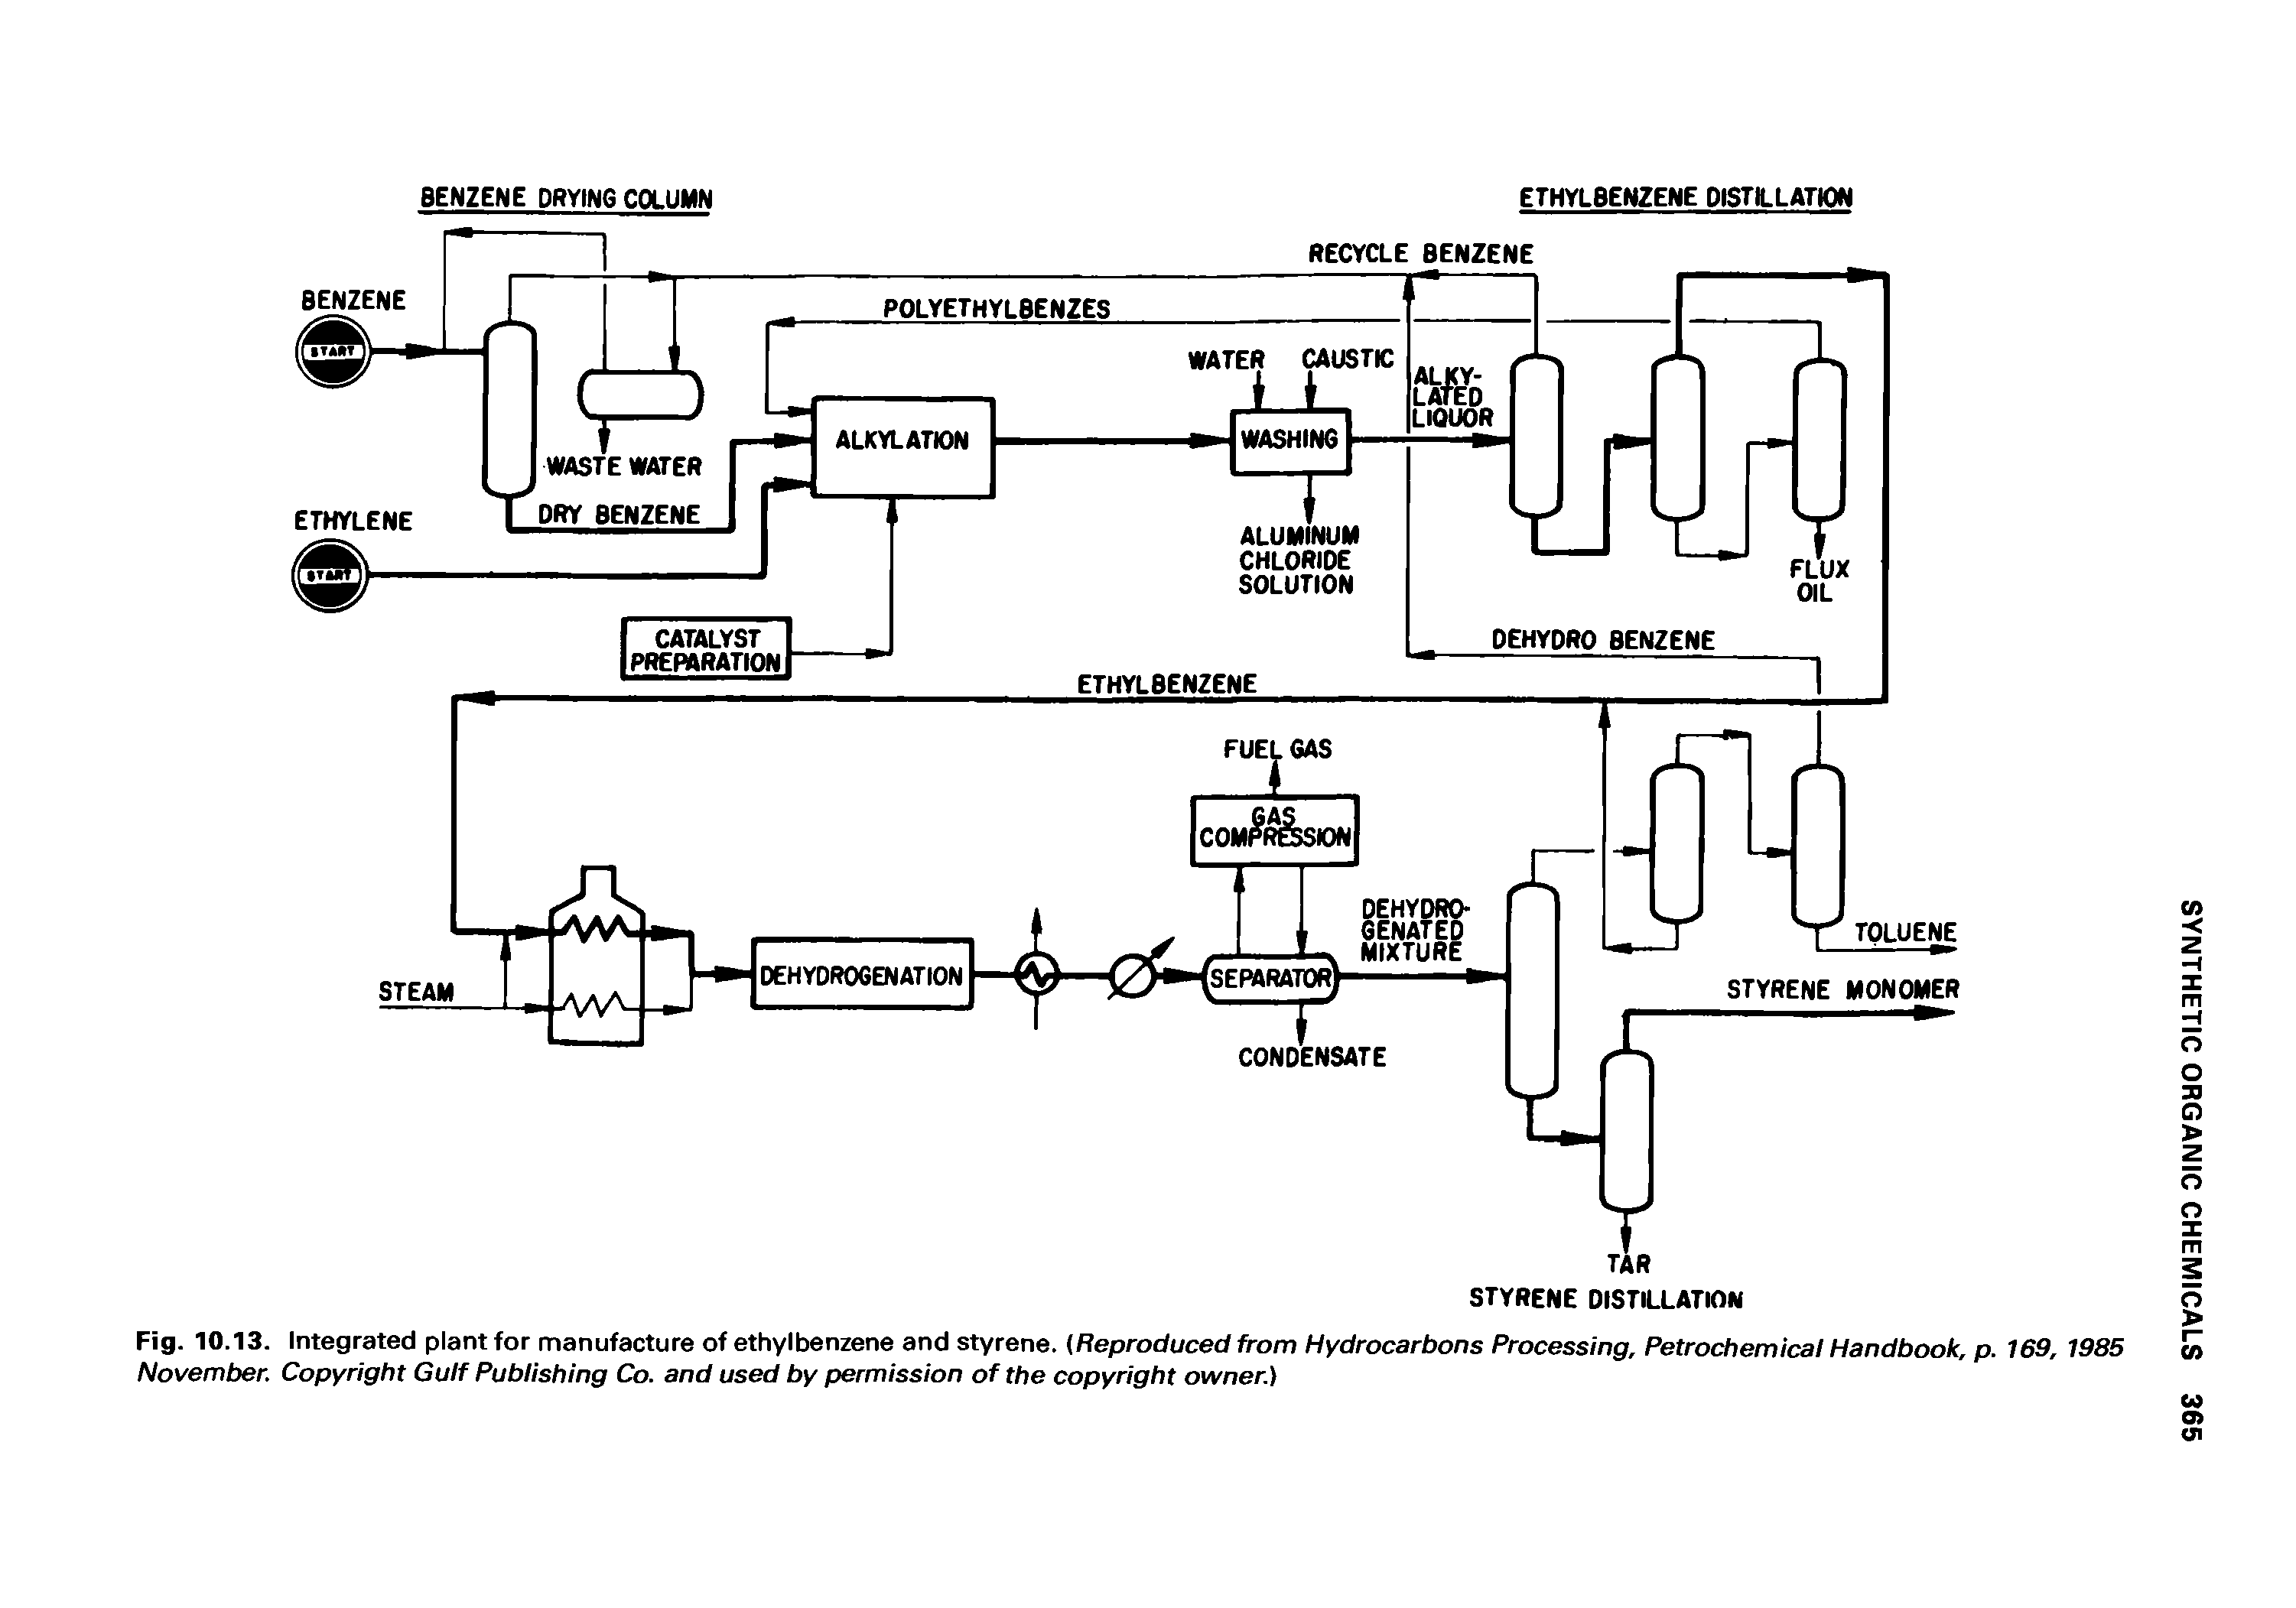 Fig. 10.13. Integrated plant for manufacture of ethylbenzene and styrene. (Reproduced from Hydrocarbons Processing, Petrochemical Handbook, p. 169, 1985 November. Copyright Gulf Publishing Co. and used by permission of the copyright owner.)...